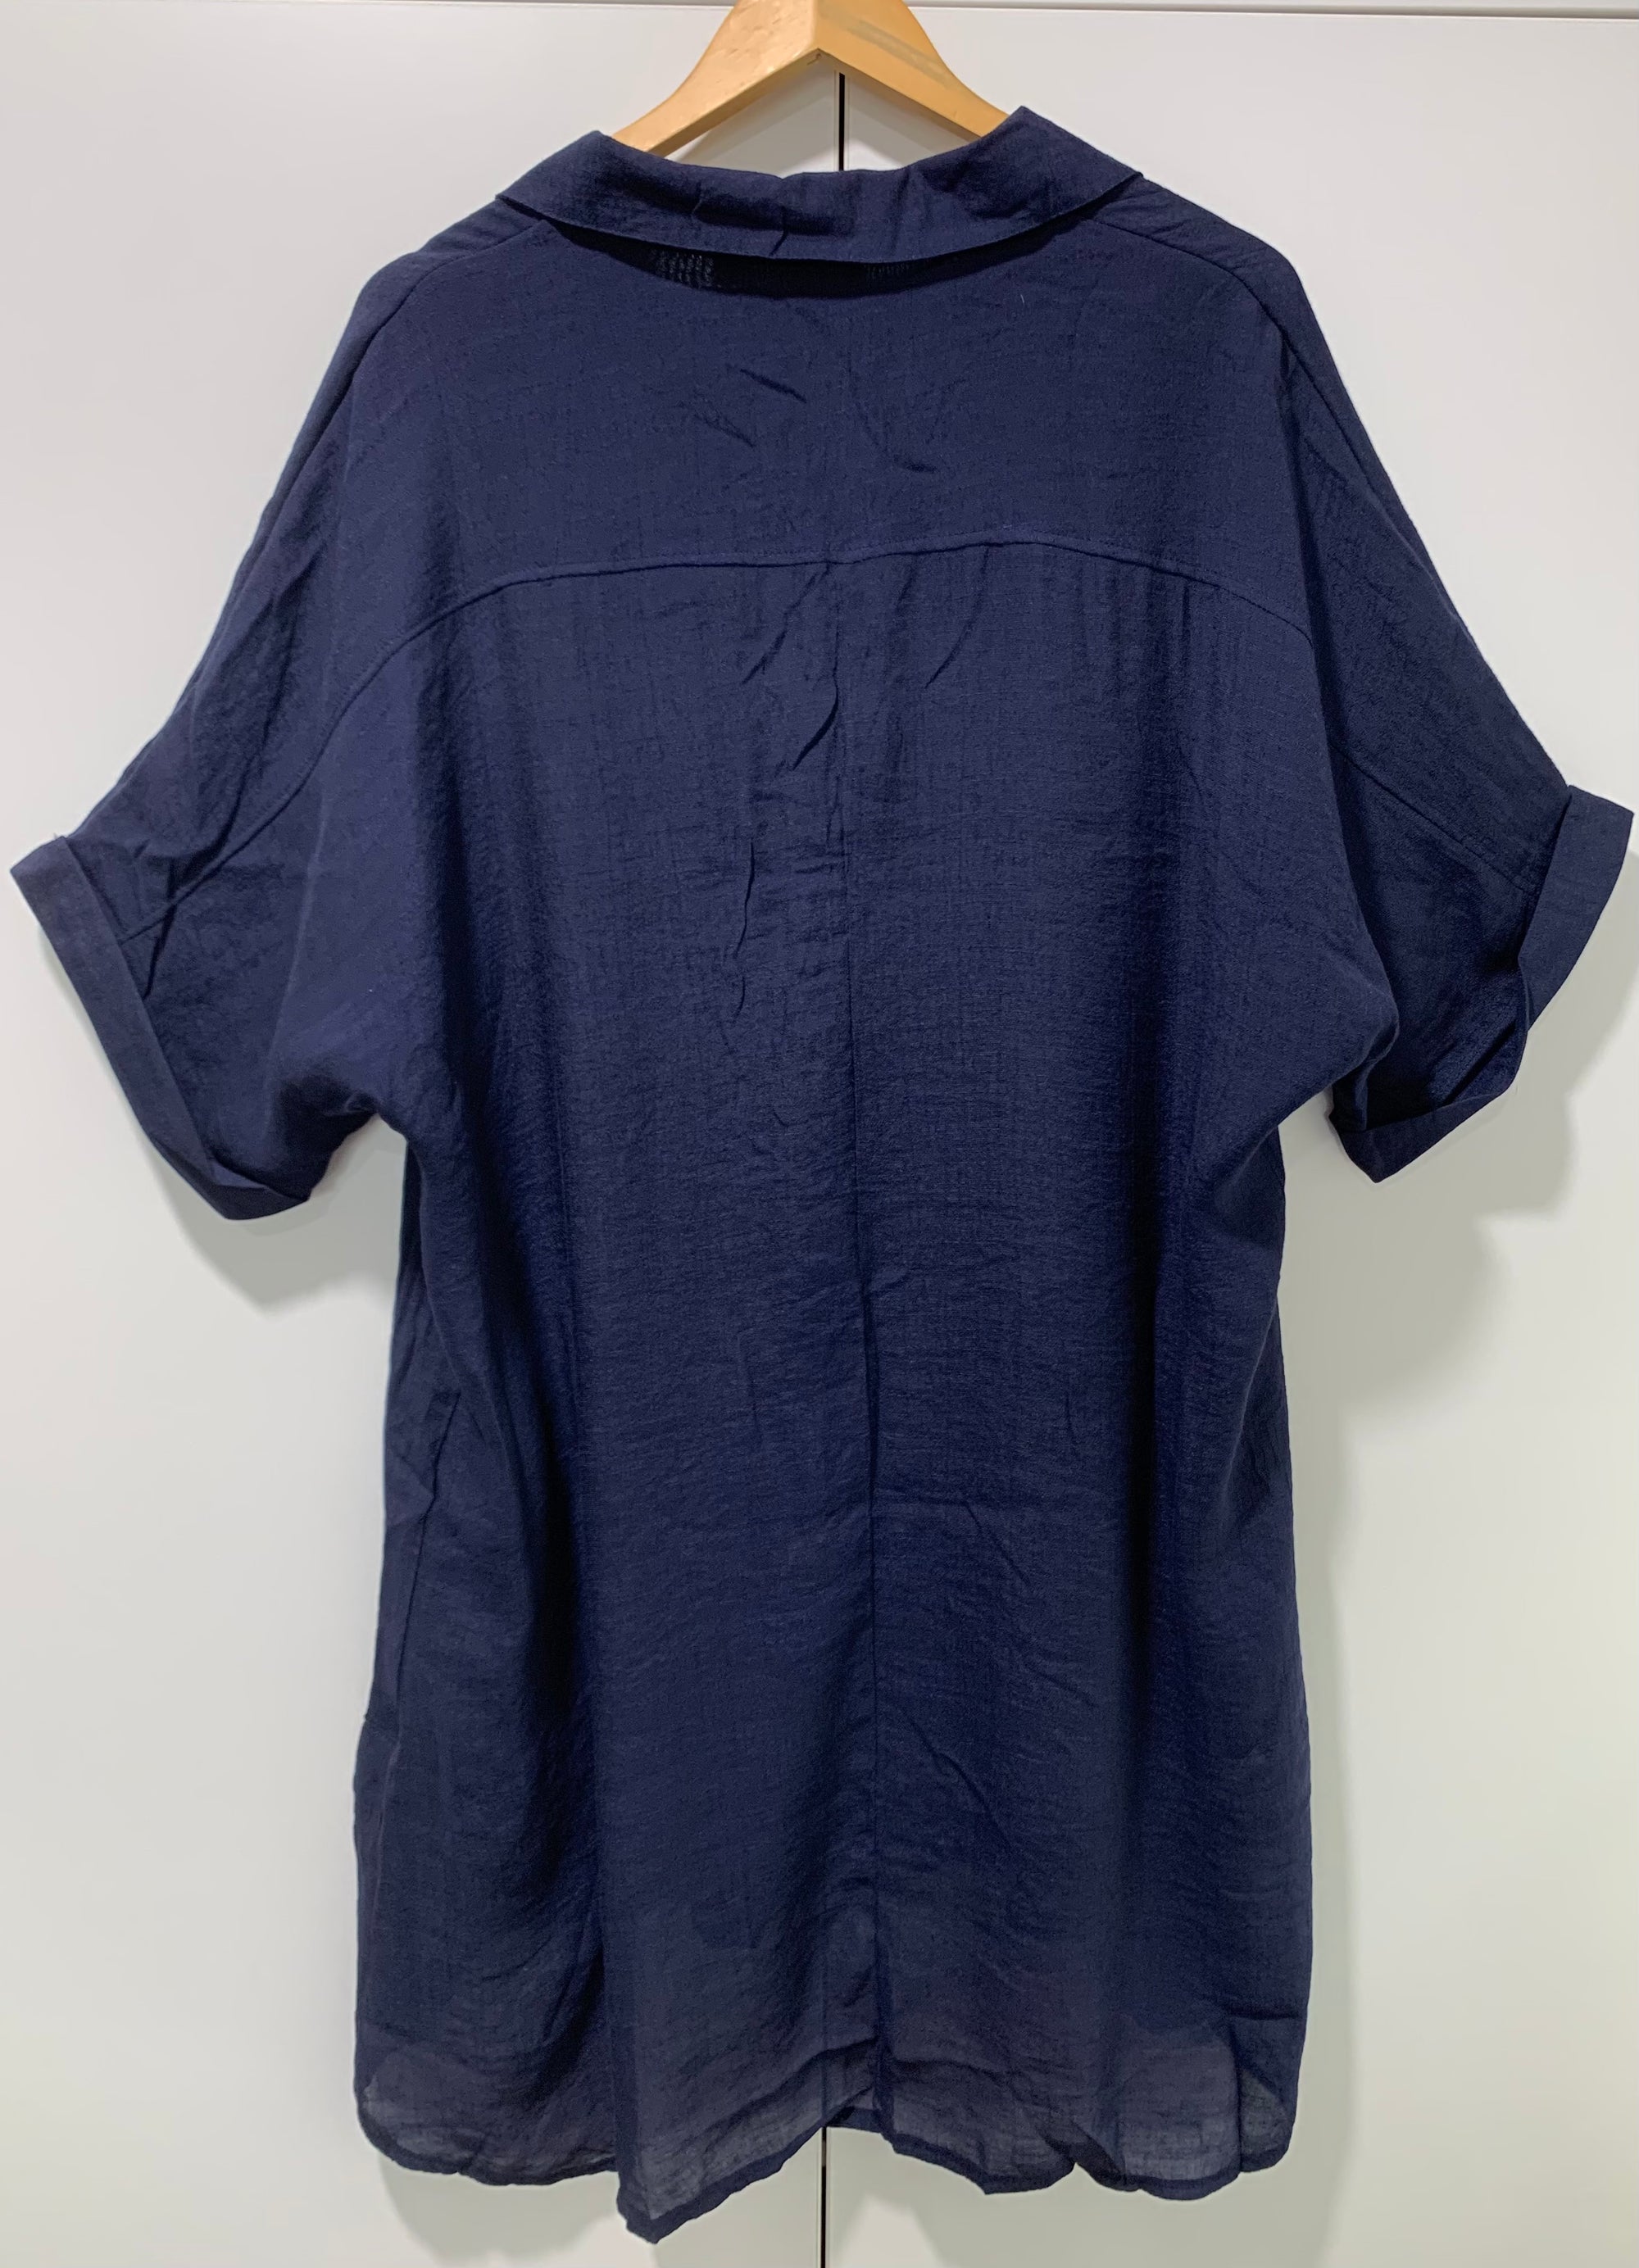 Tunic Dress in Navy Blue Cotton Blend with Short Rolled Up Sleeves